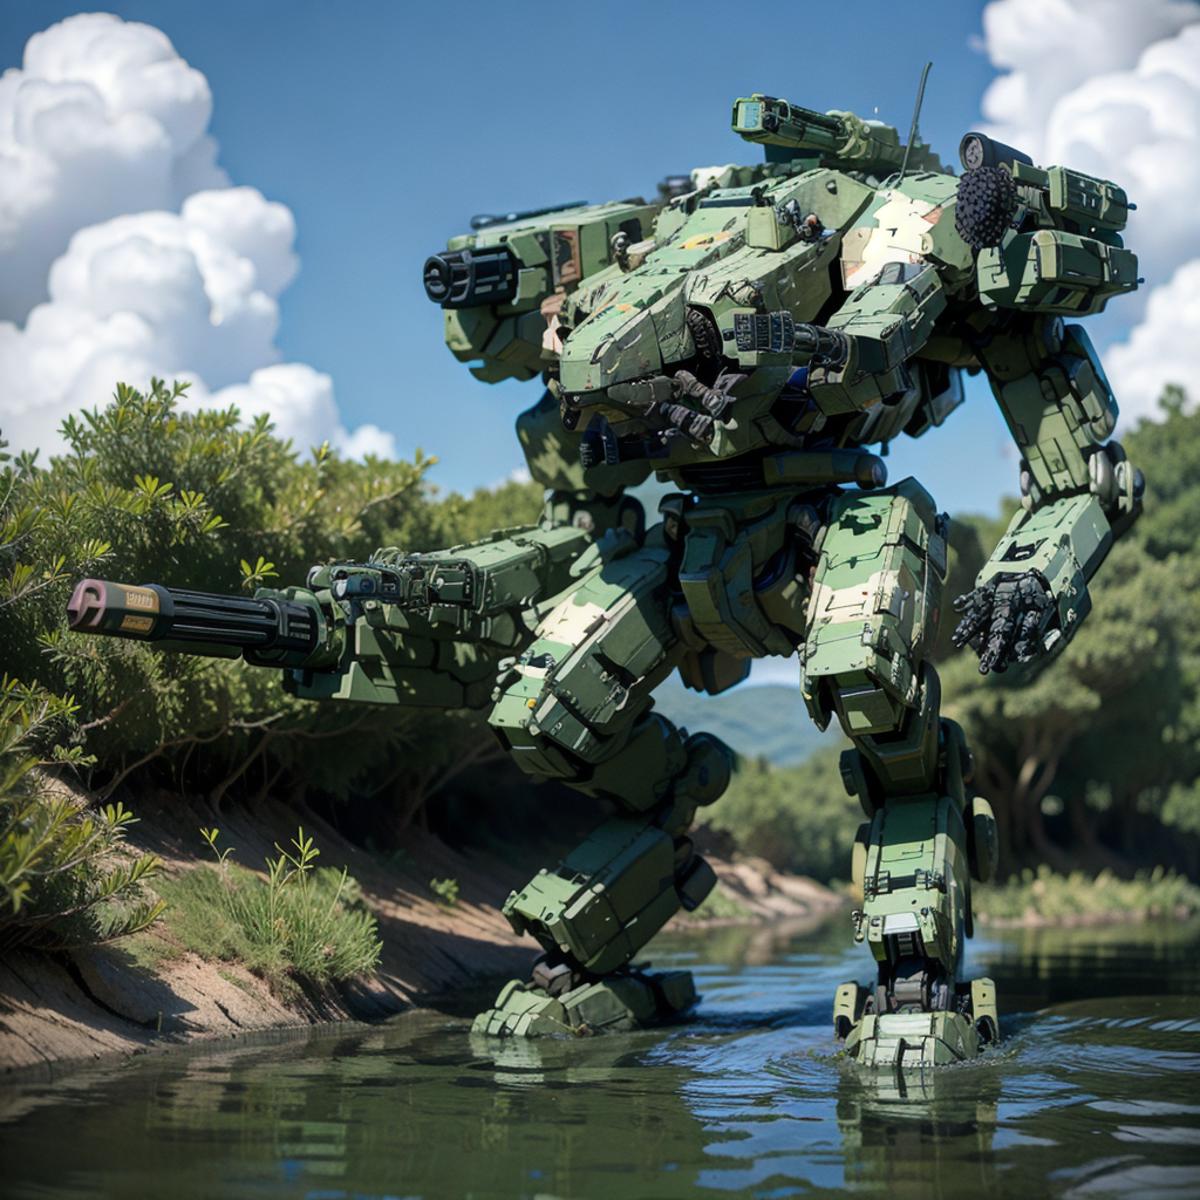 Bipedal Tactical Mecha image by stormriver